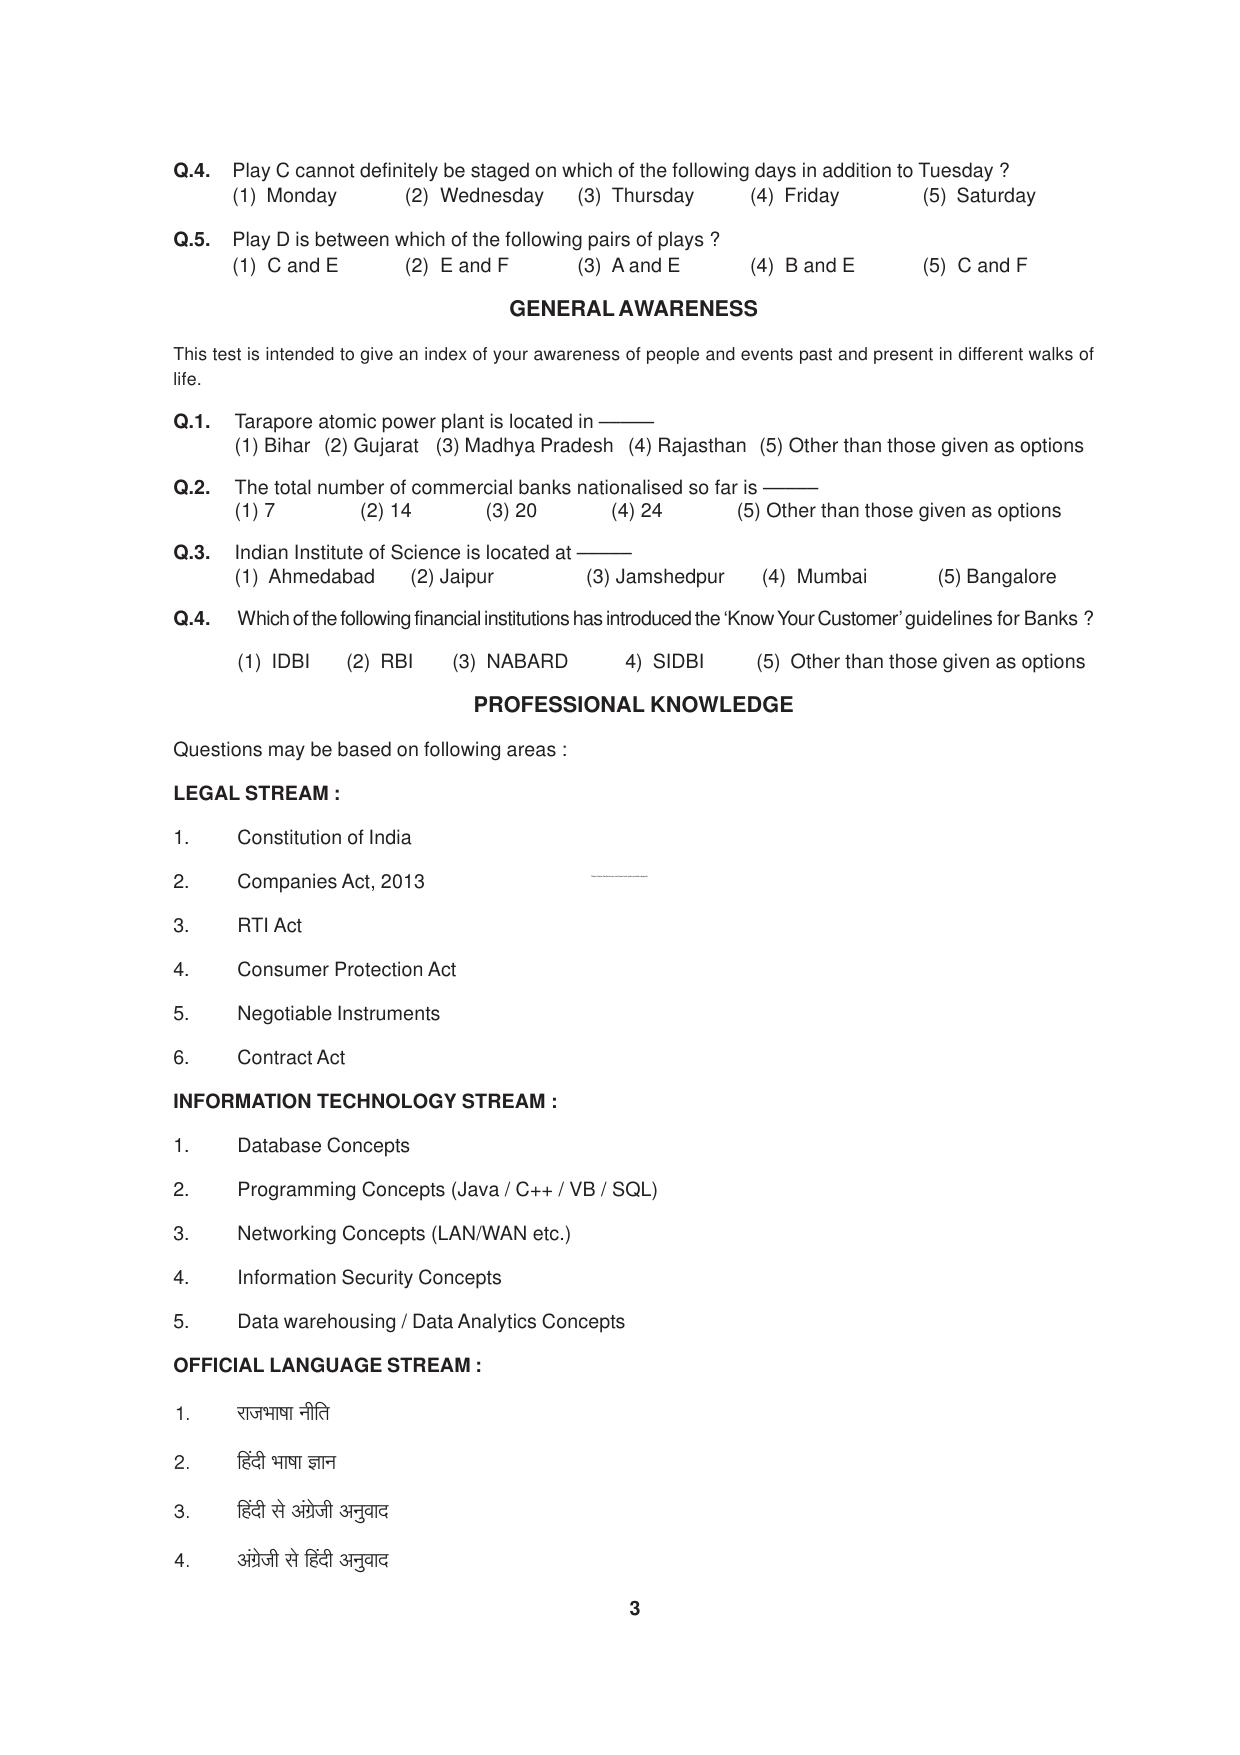 SEBI Officer Sample Question Paper Part 1 - Page 3